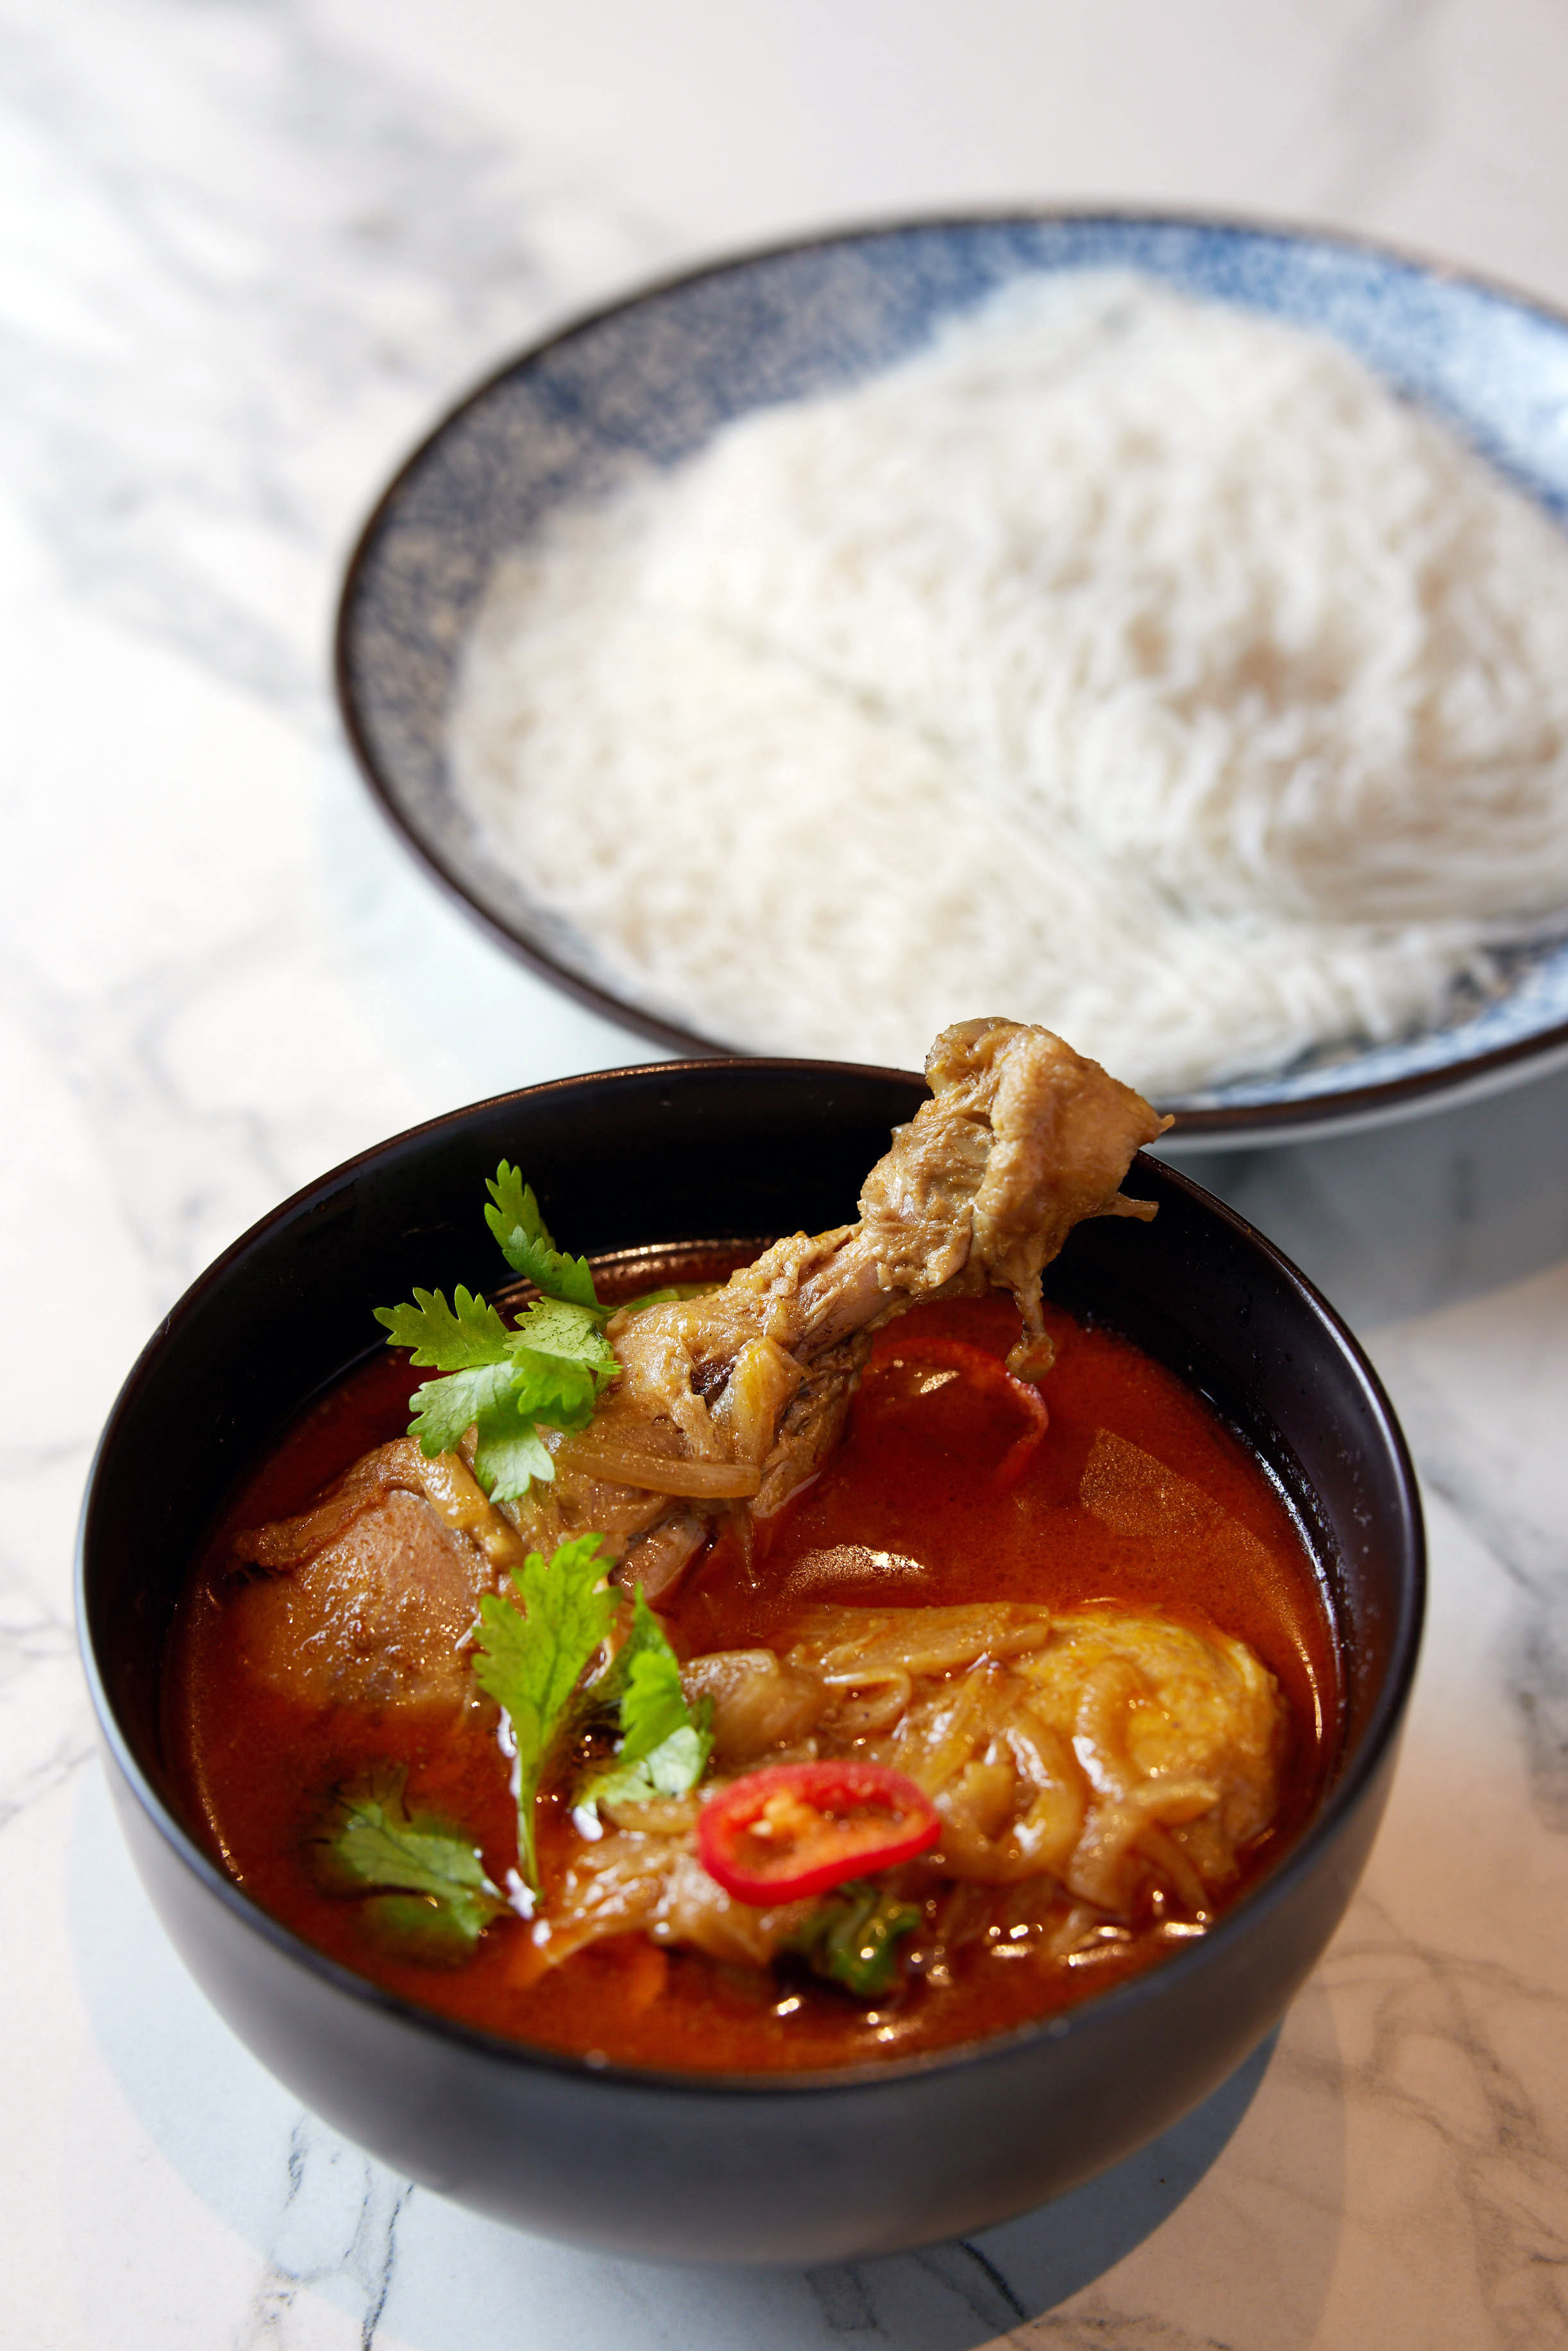 Sri Lankan Chicken Curry & Tomato Chutney with String Hoppers, $16